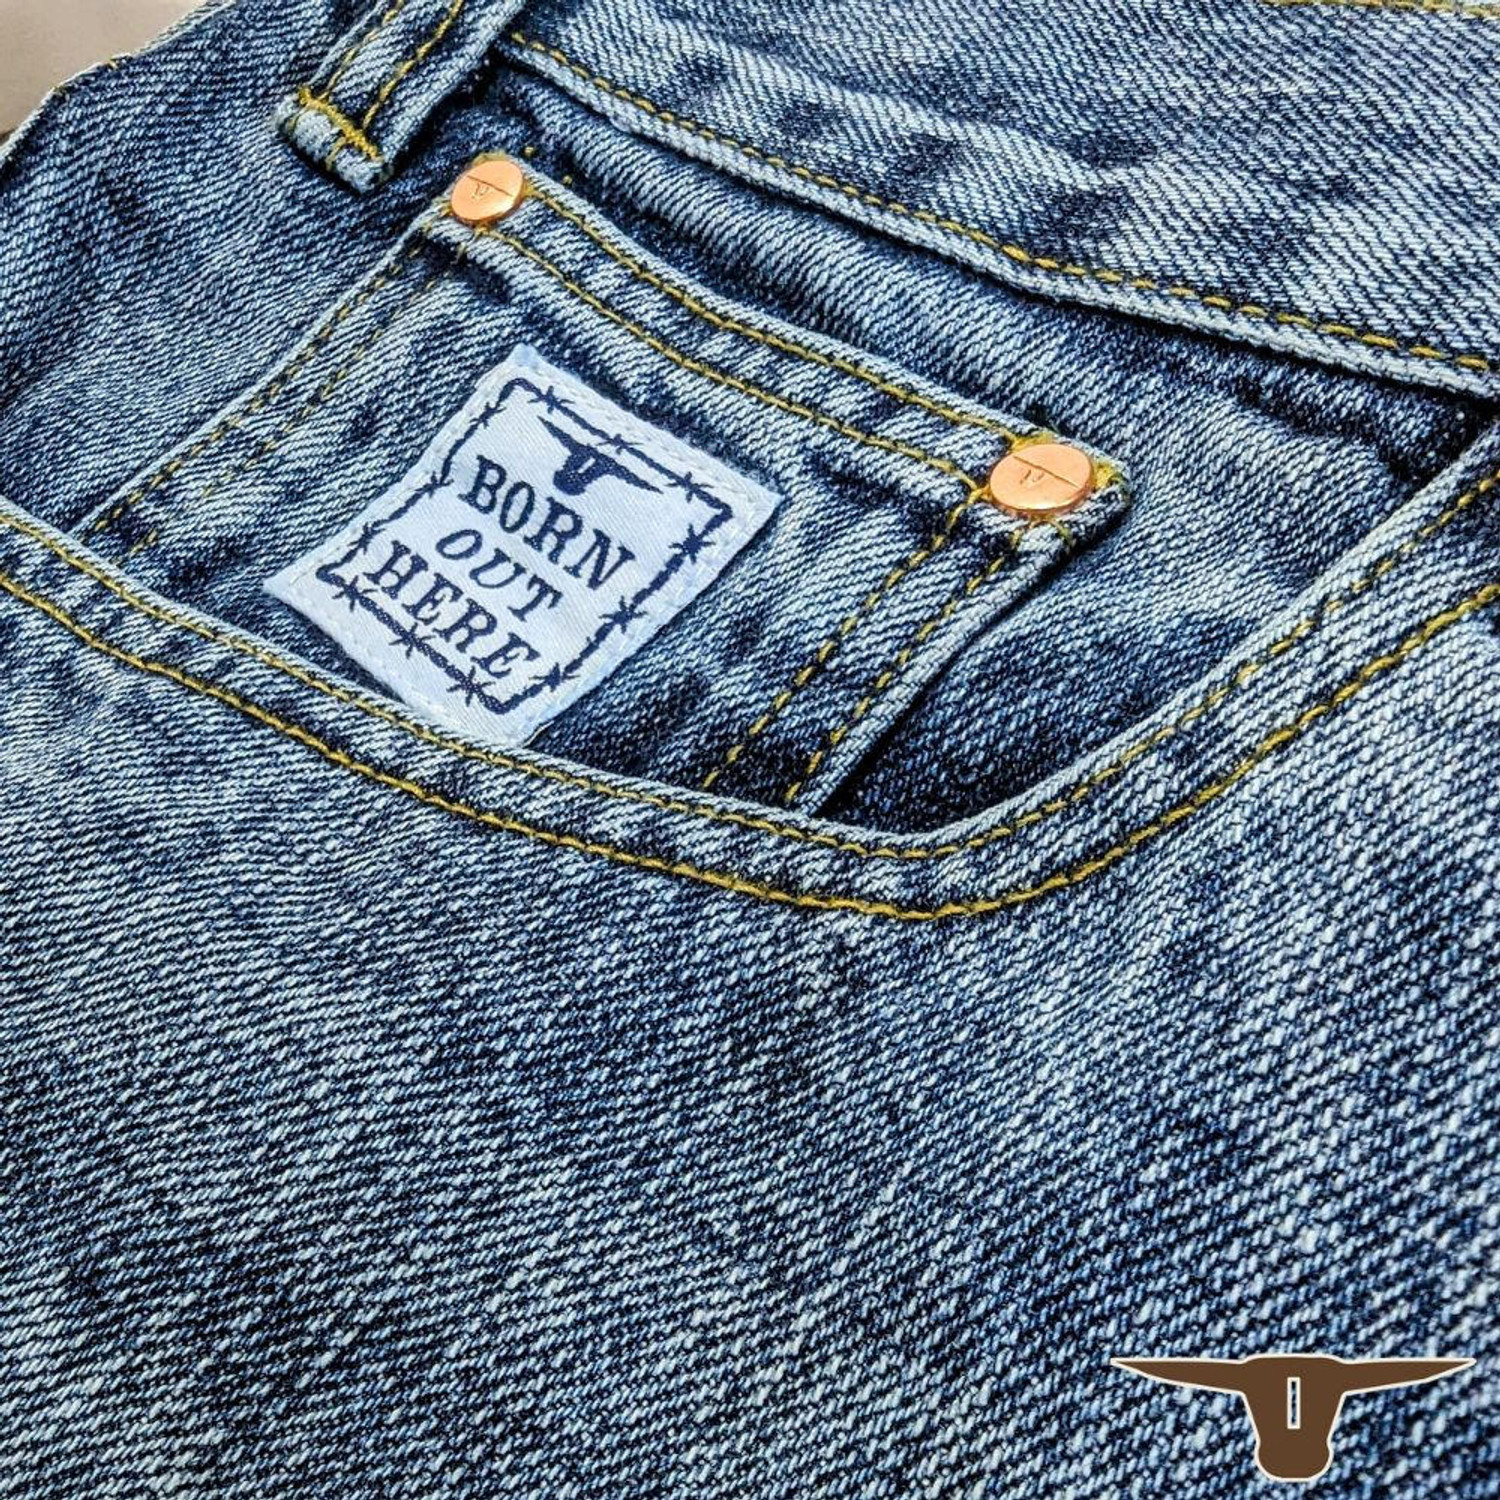  Born Out Here White Brand Jeans (BWBJ400) 